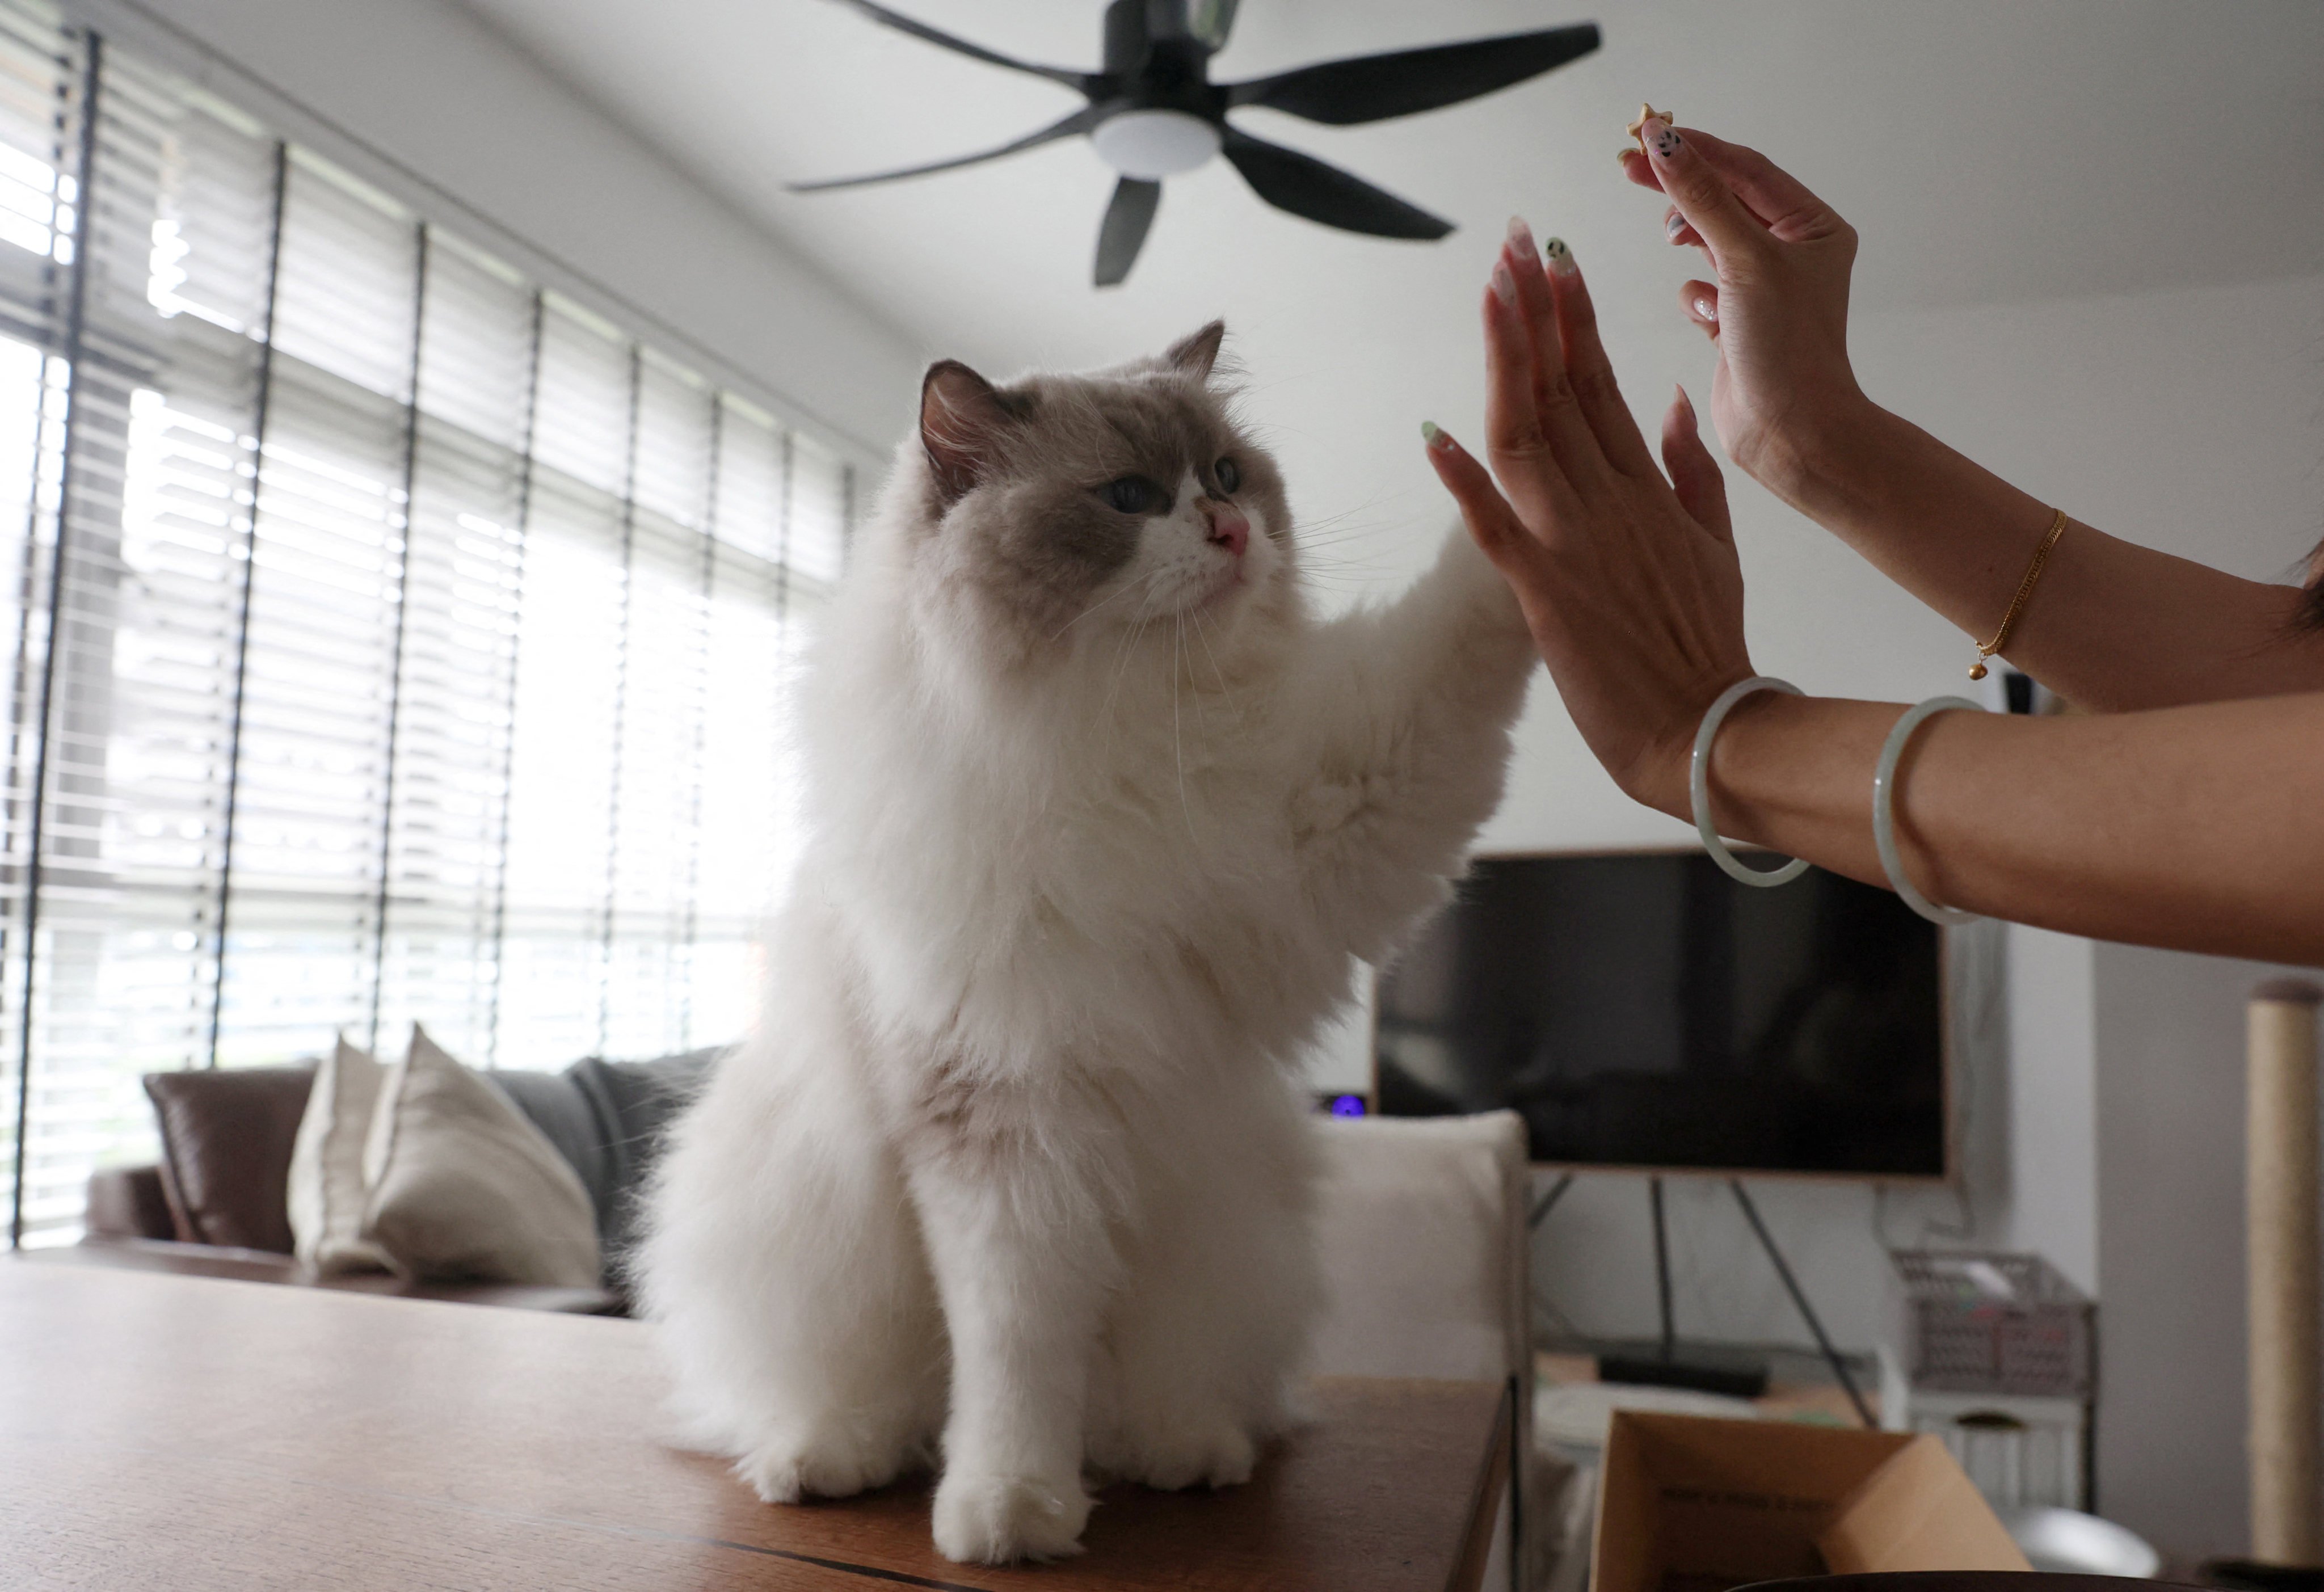 Ragdoll cat Mooncake gives owner Sunny a high-five at their Housing and Development Board flat in Singapore. Photo: Reuters